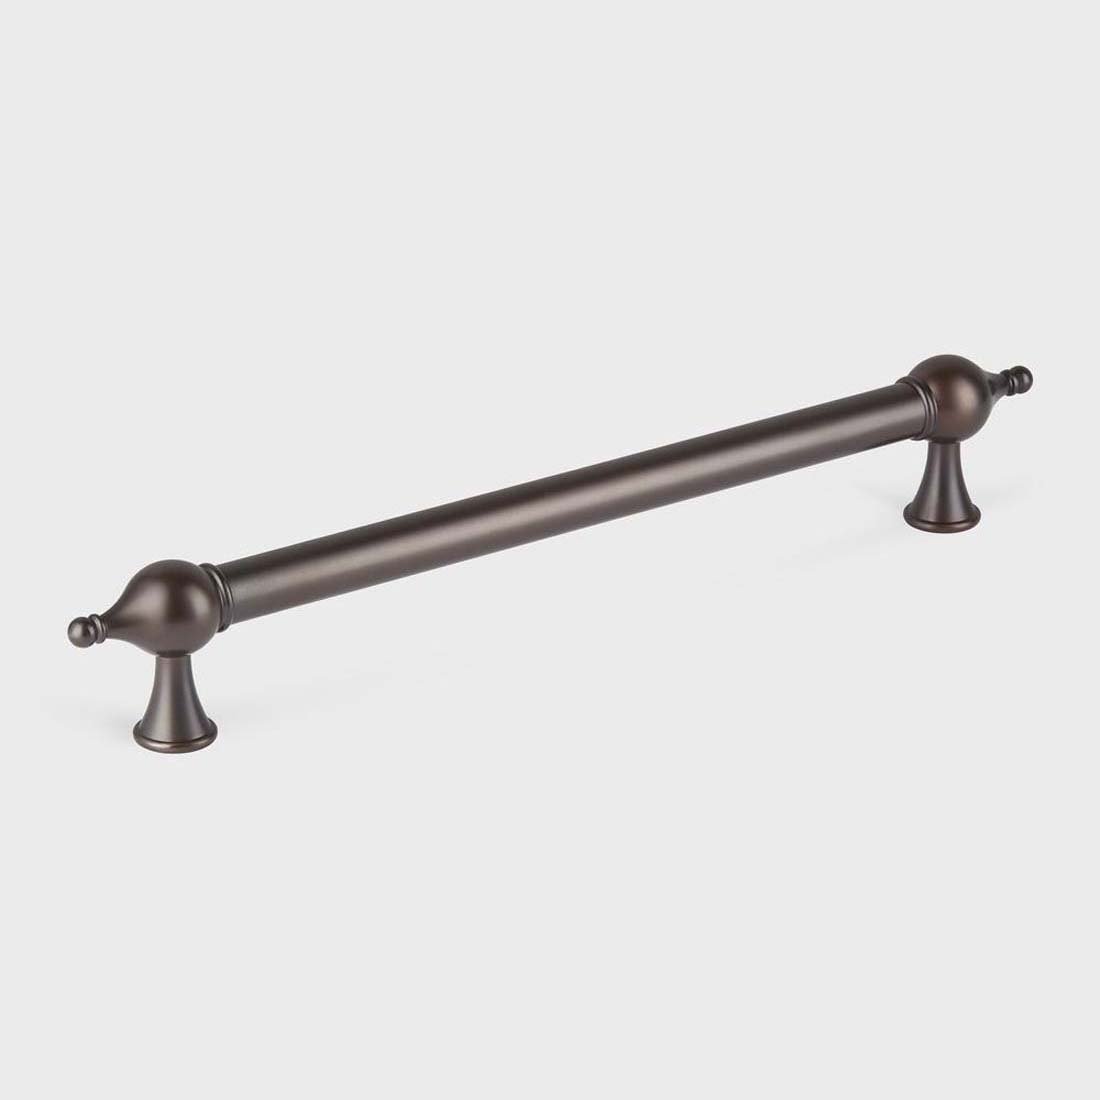 12-7/16" Belgrave pull in Polished Nickel